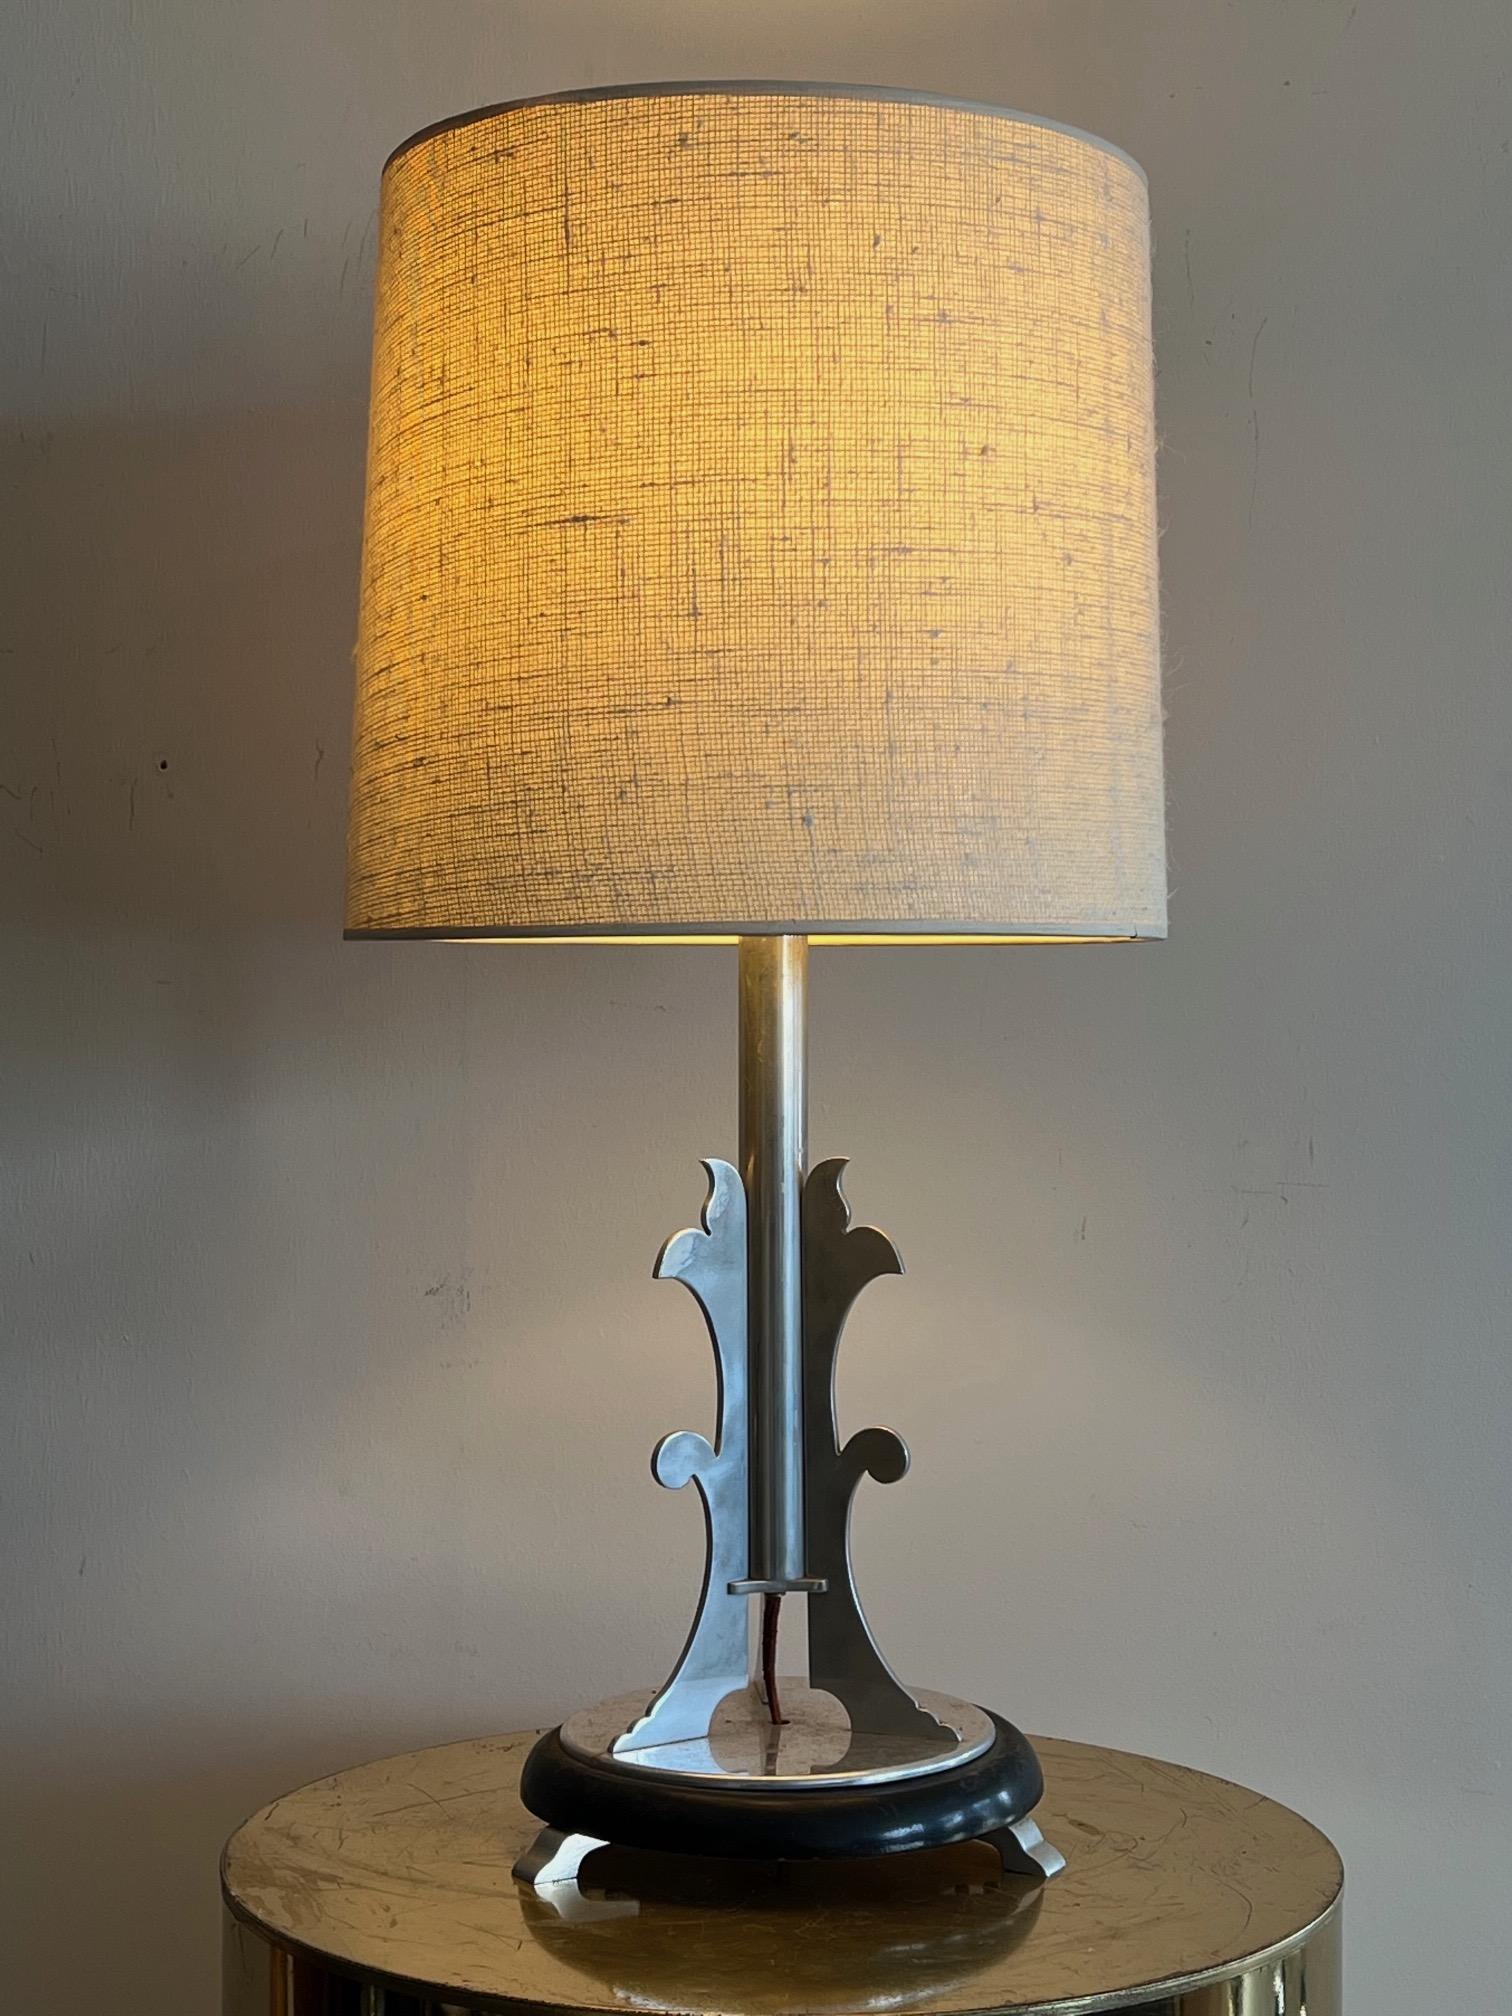 An unusual Machine Age/Art Deco table lamp. Polished aluminum, on a raised base. Original copper lined socket.